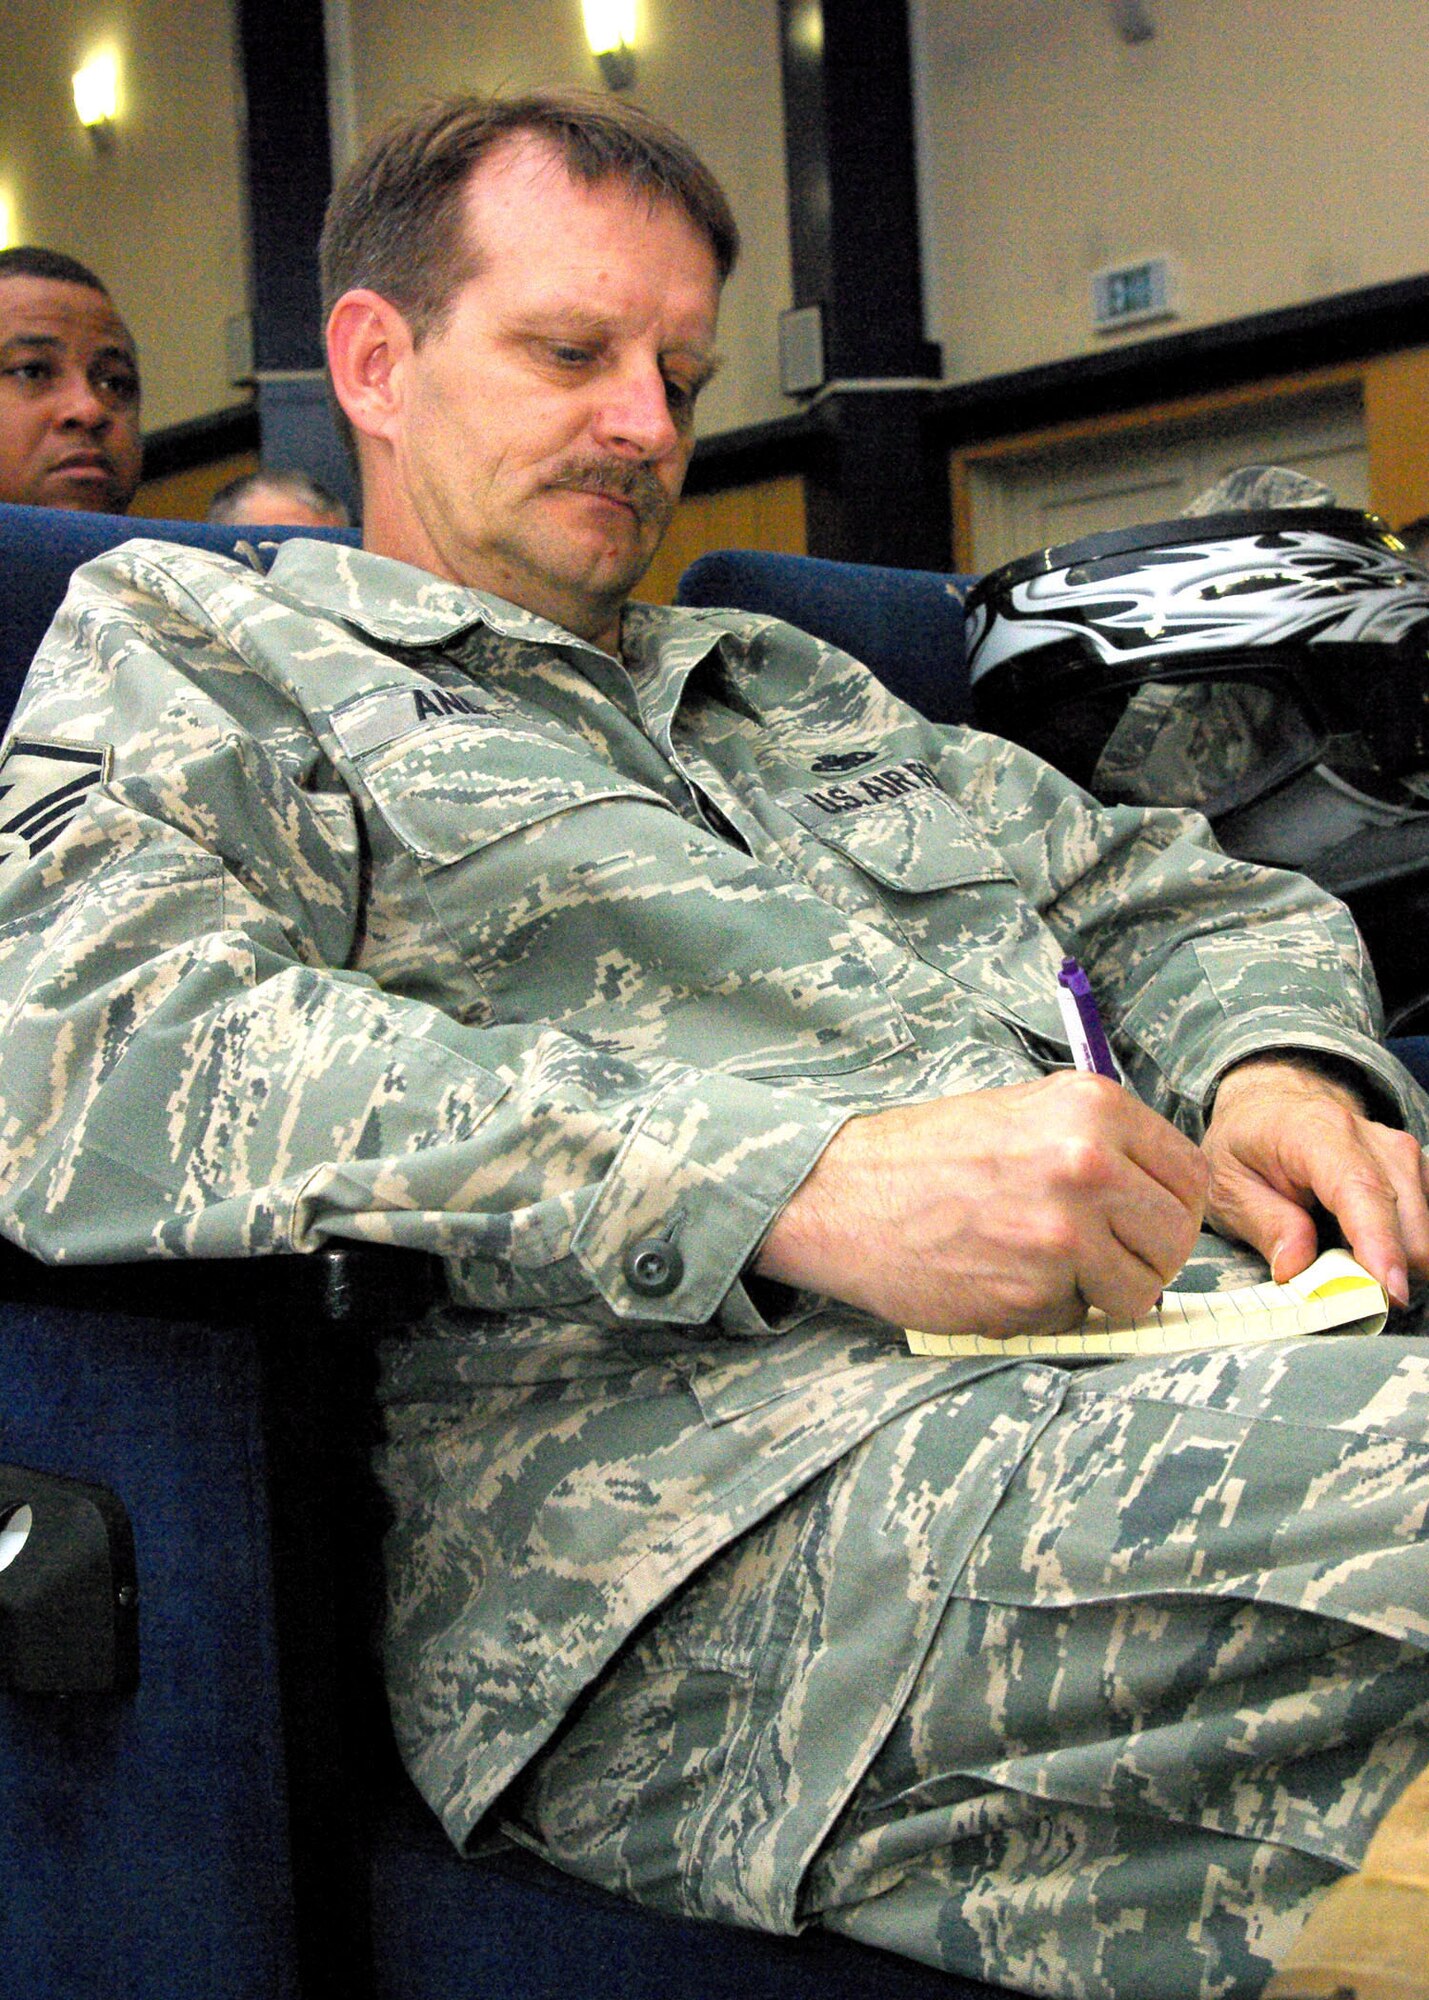 SPANGDAHLEM AIR BASE, Germany -- Master Sgt. Lawrence Anderson, 52nd Operations Support Squadron first sergeant, takes notes on the changes being implemented to Spangdahlem Air Base's Mission Support Flight. (U.S. Air Force photo by Staff Sgt. Matthew S. Bright.)